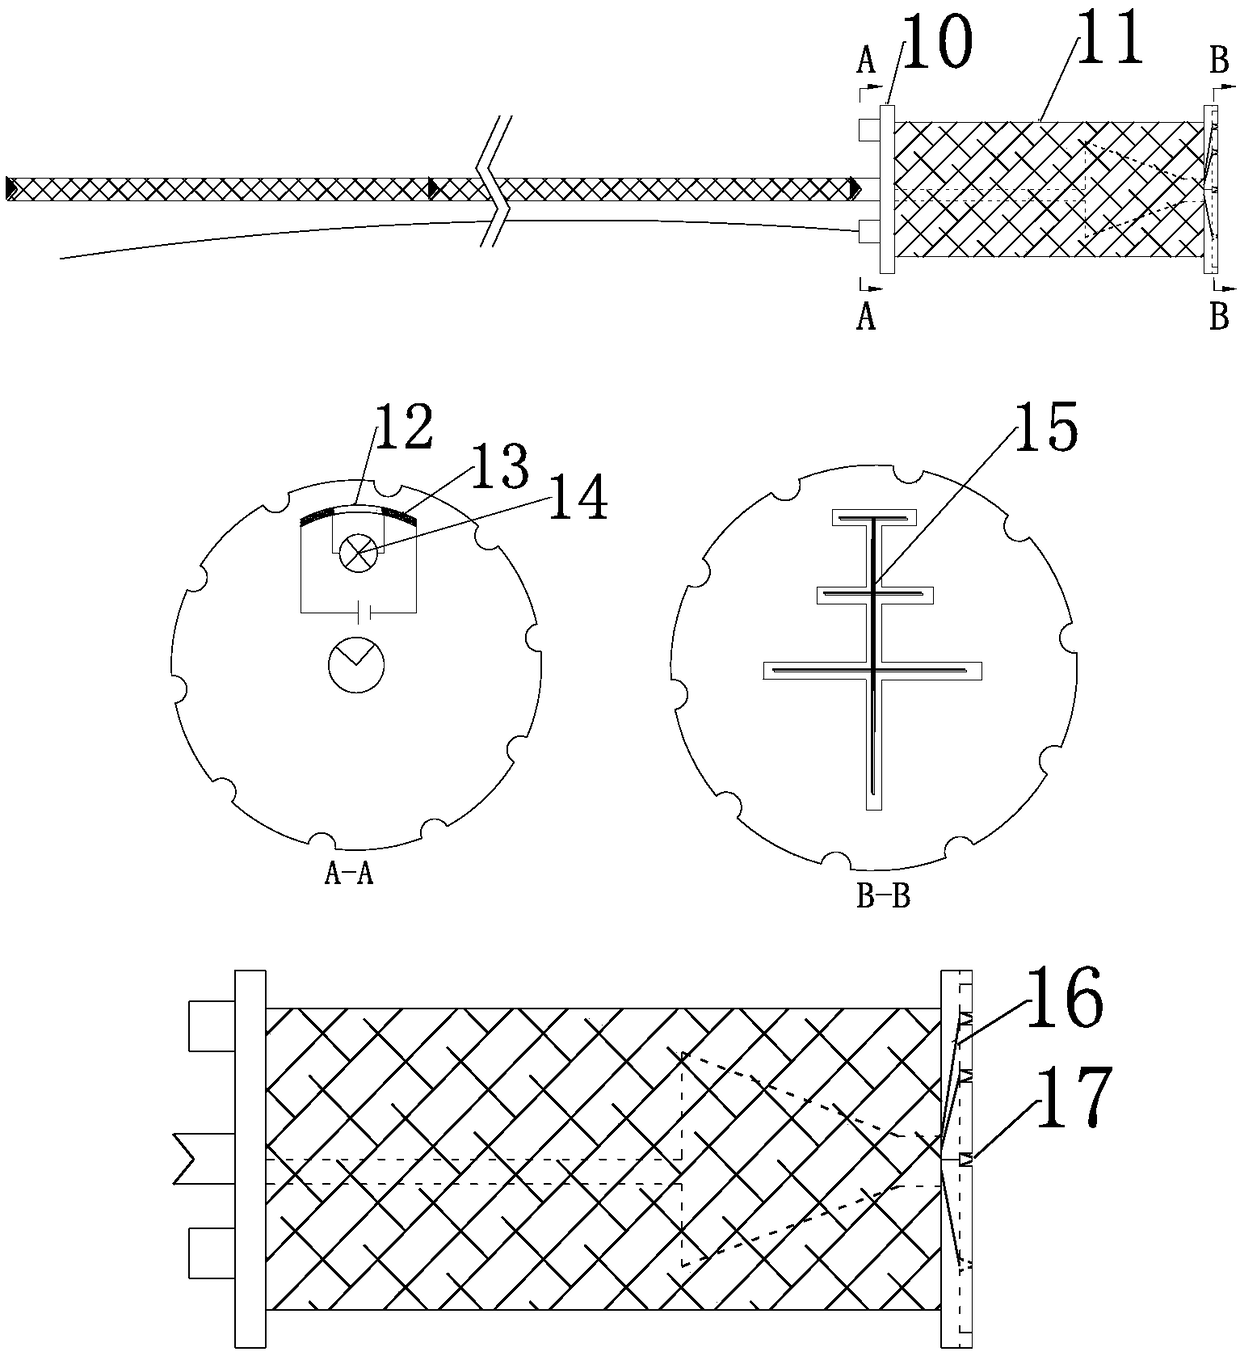 Spatial orientation device for rock core in hole and verification method for stress relief method by overcoring